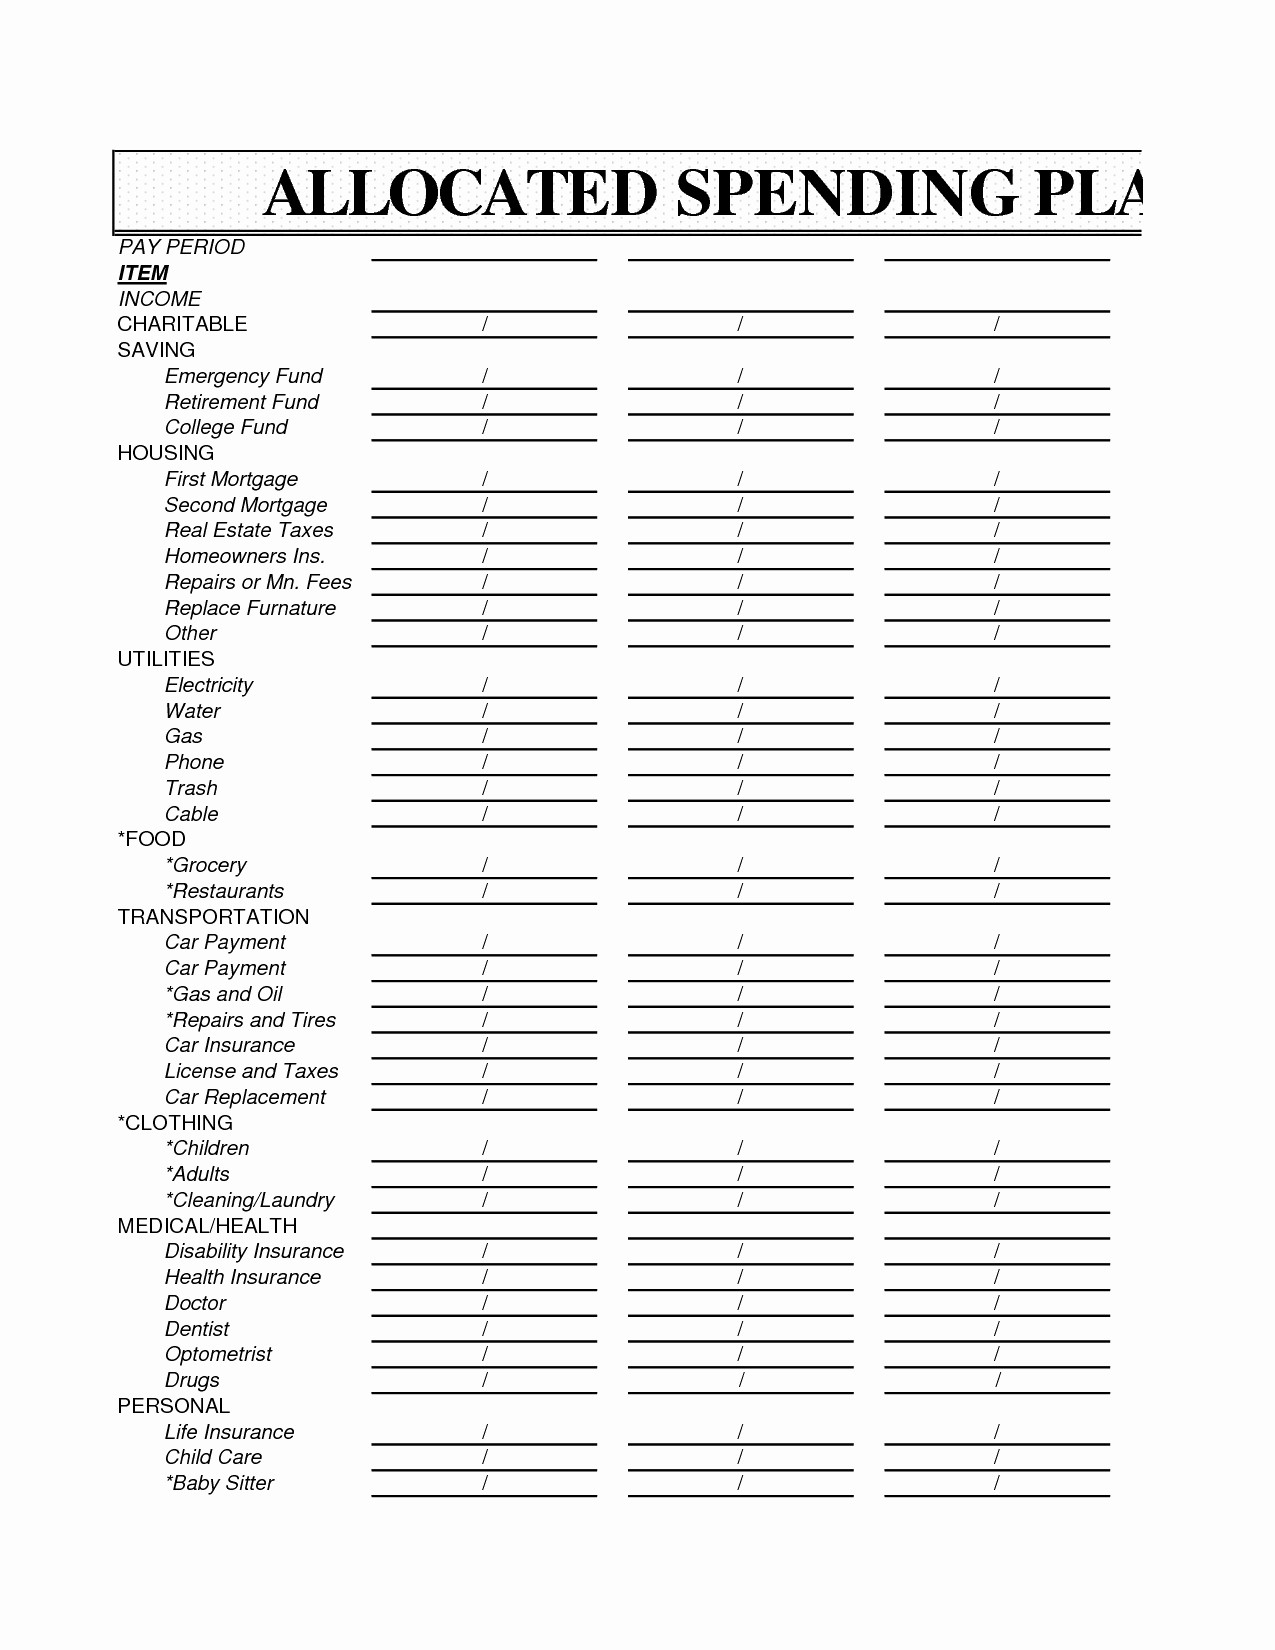 Dave Ramsey Allocated Spending Plan Excel Spreadsheet Regarding Allocated Spending Plan Dave Ramsey  Austinroofing